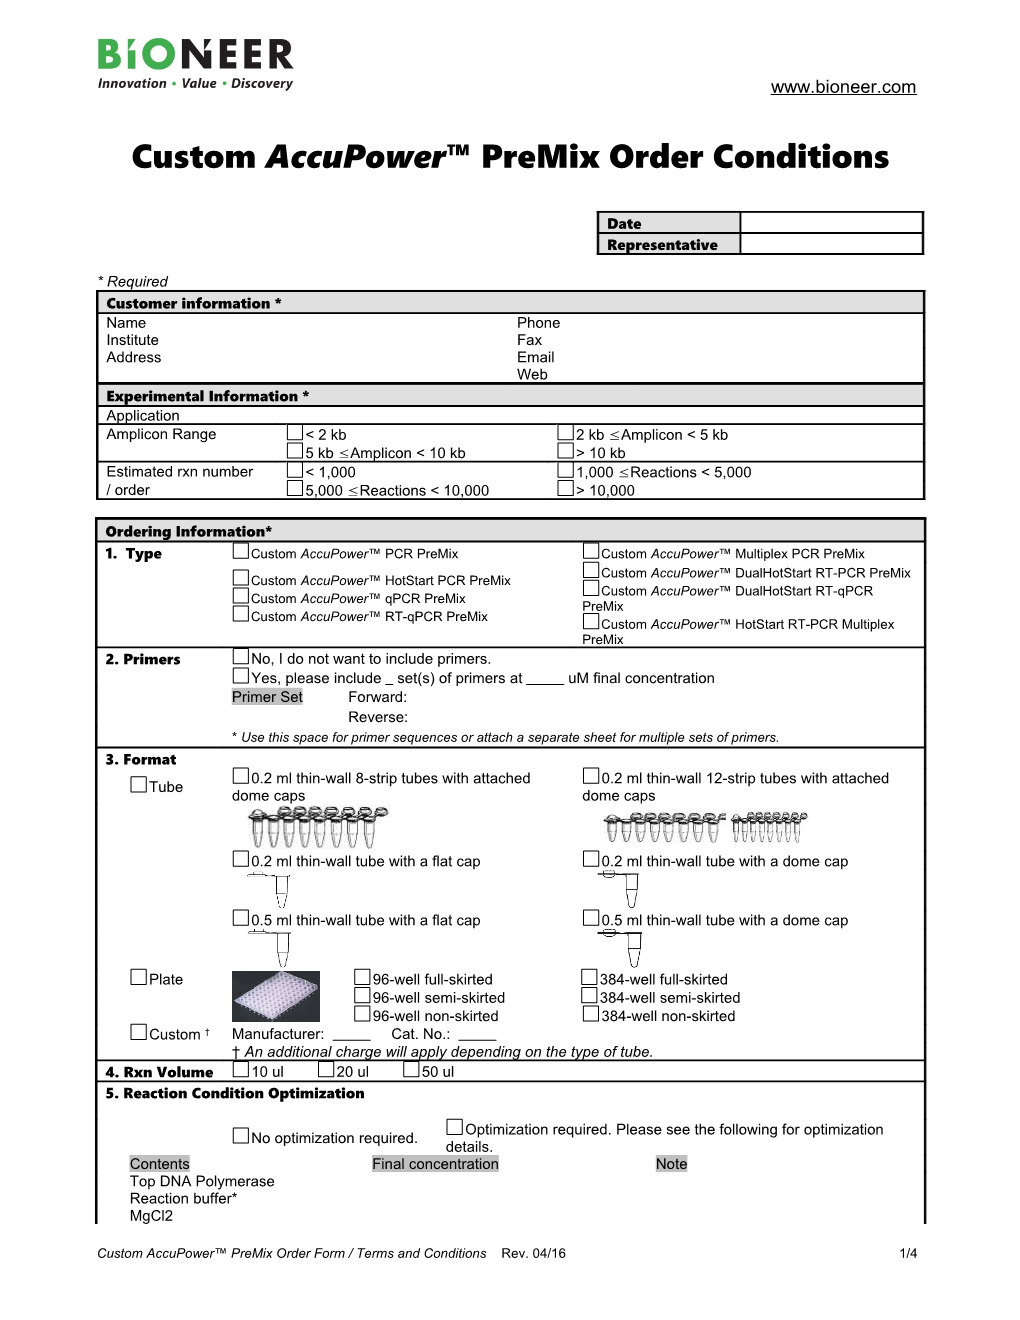 Page 1- Custom Accupower Order Conditions